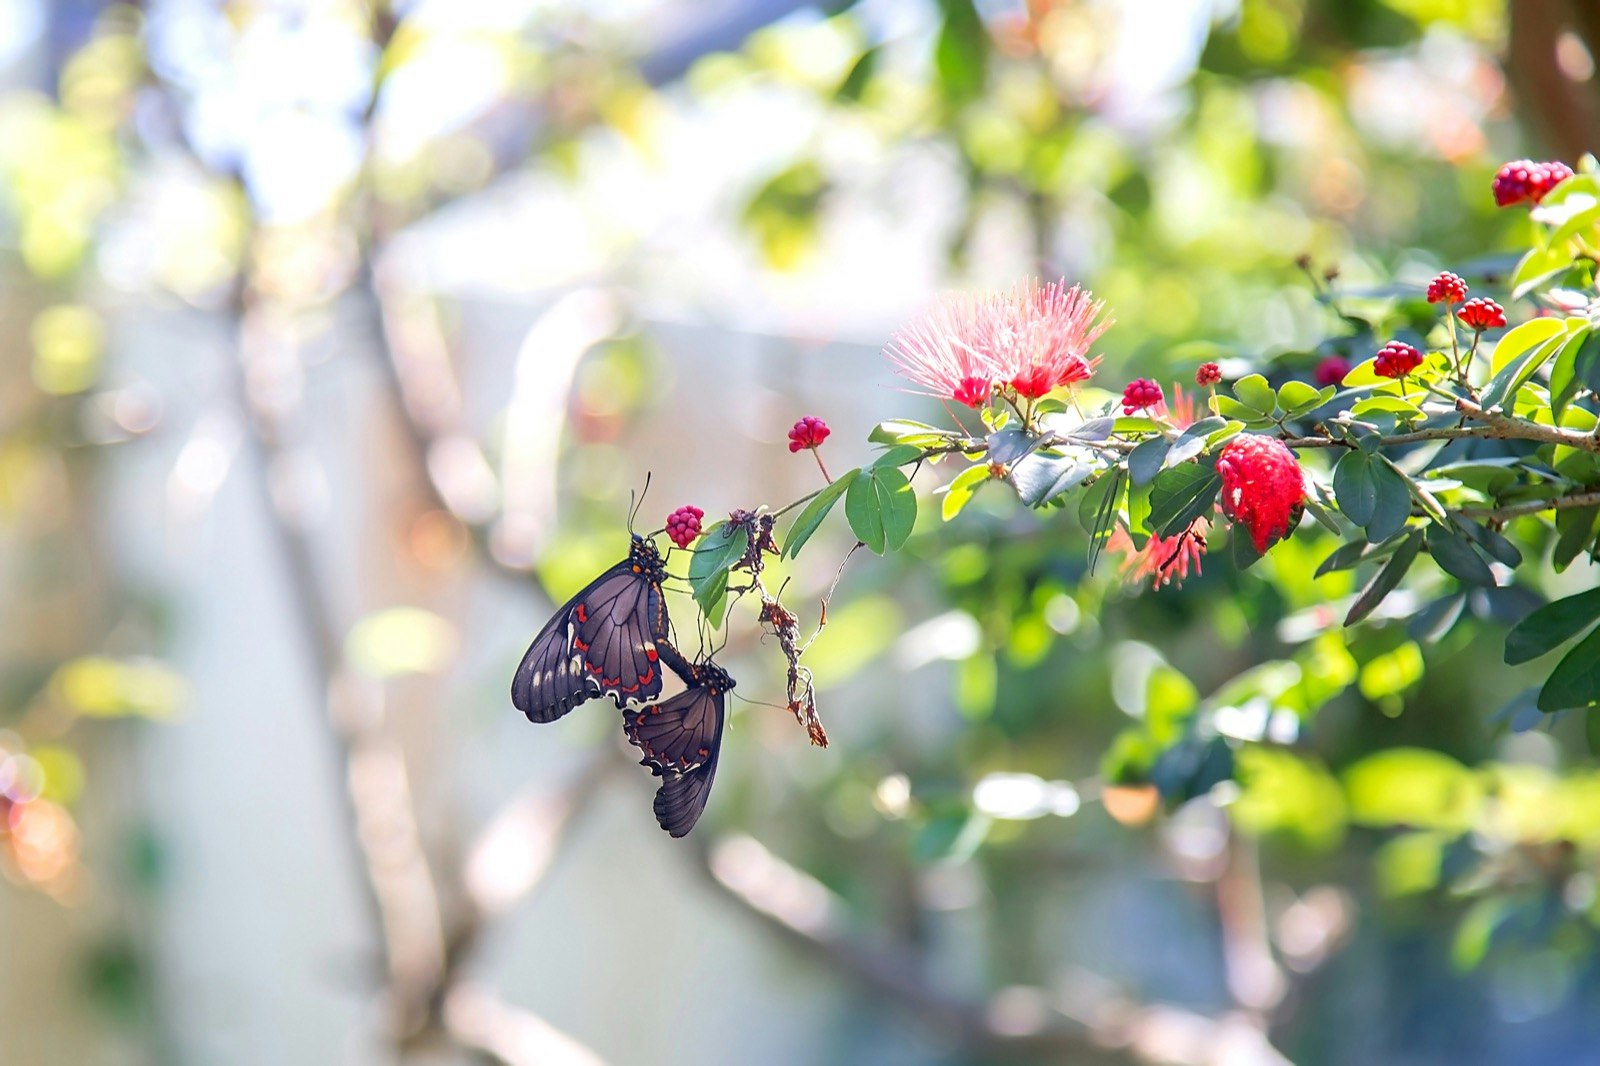 A black butterfly lands on a branch with red flowers